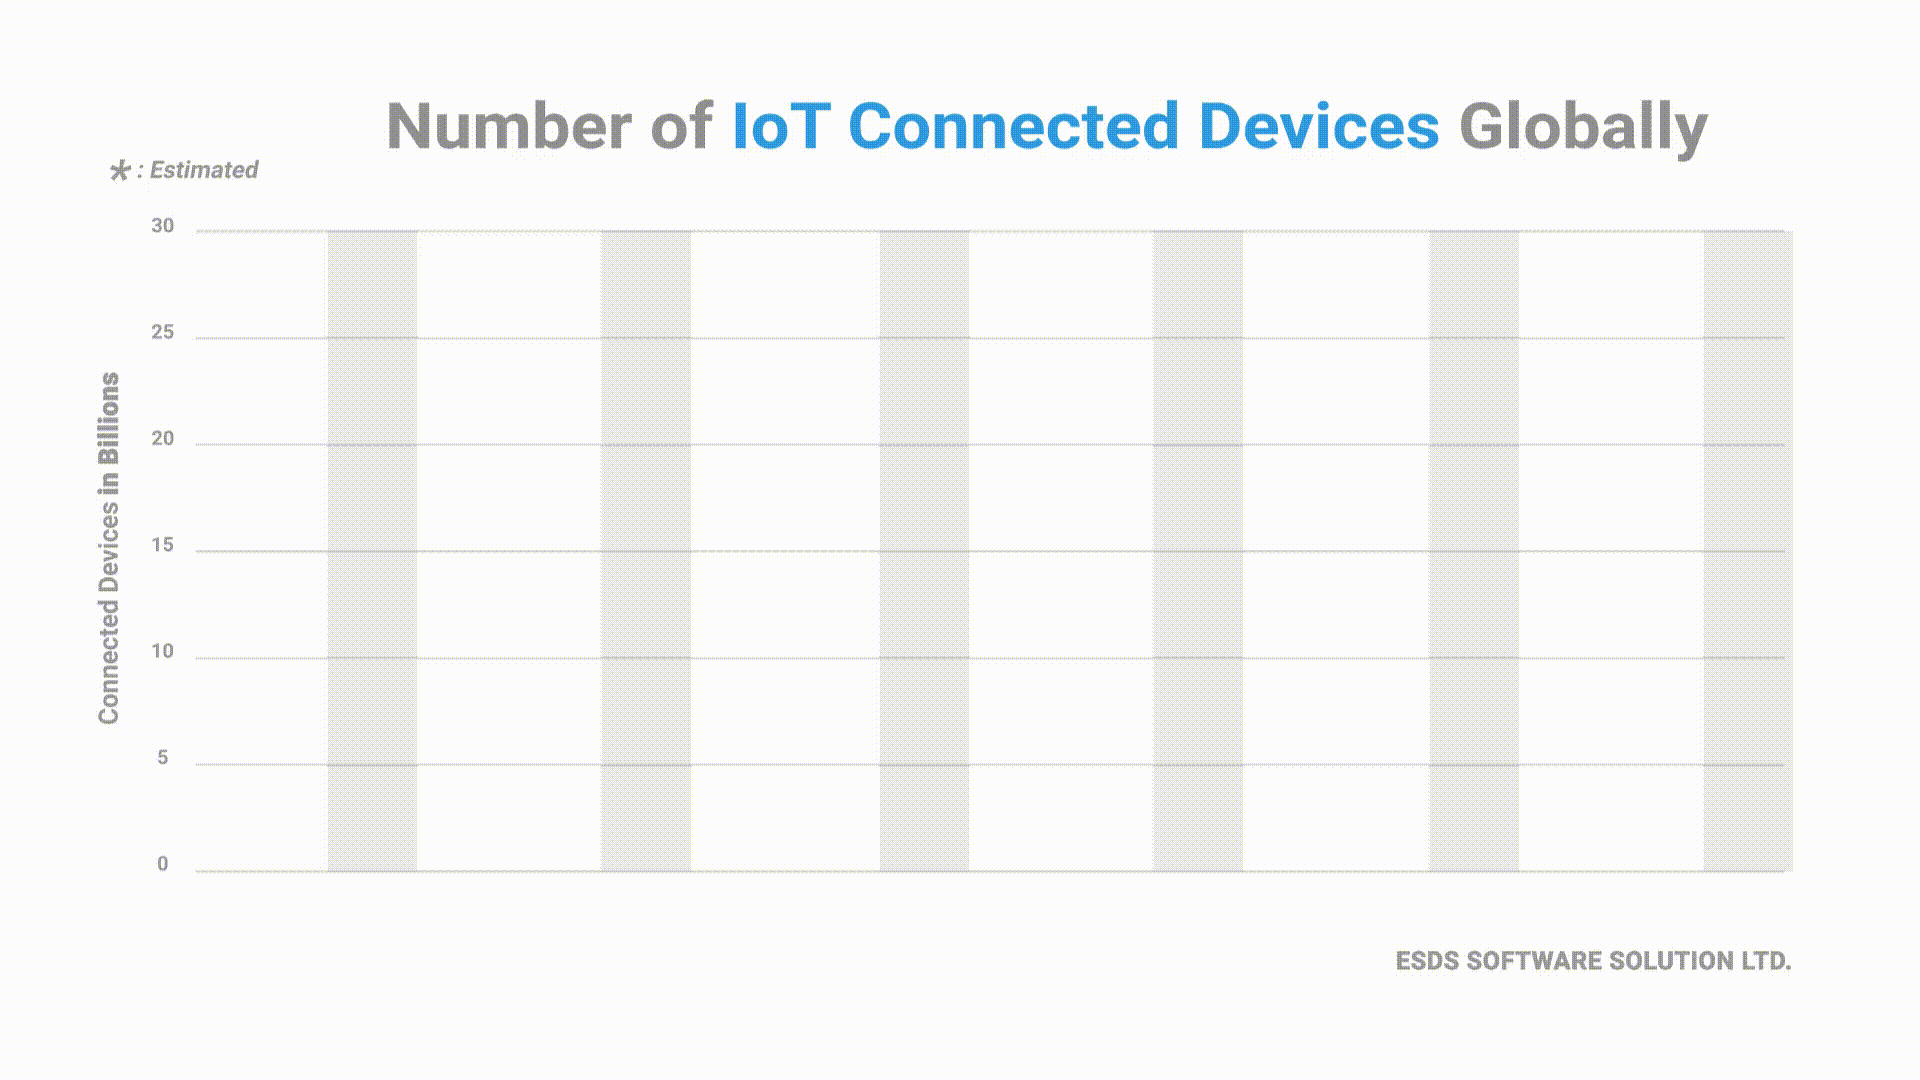 Why is IoT Getting Important